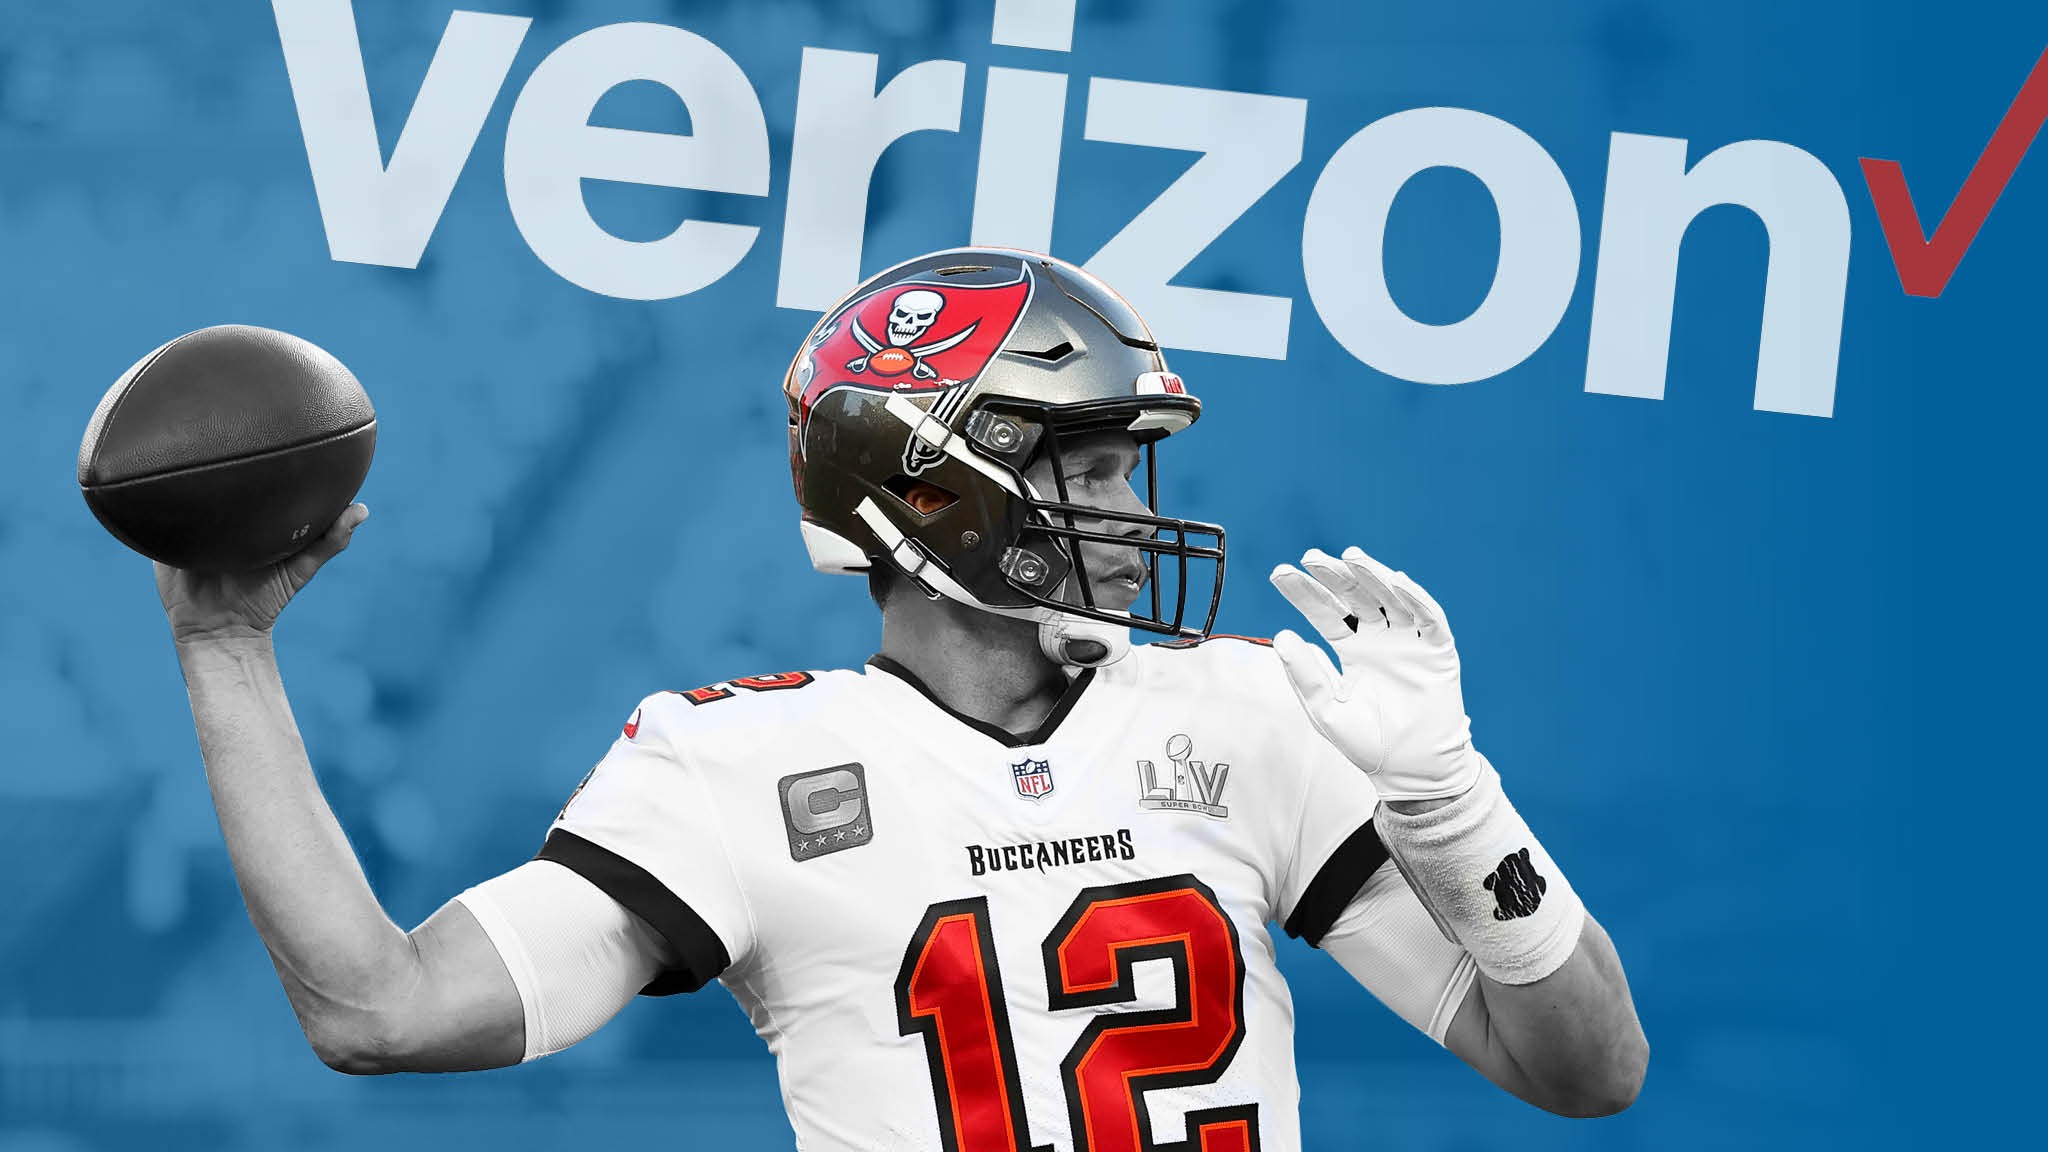 Verizon gambles on sports betting to restore media business - Financial Times